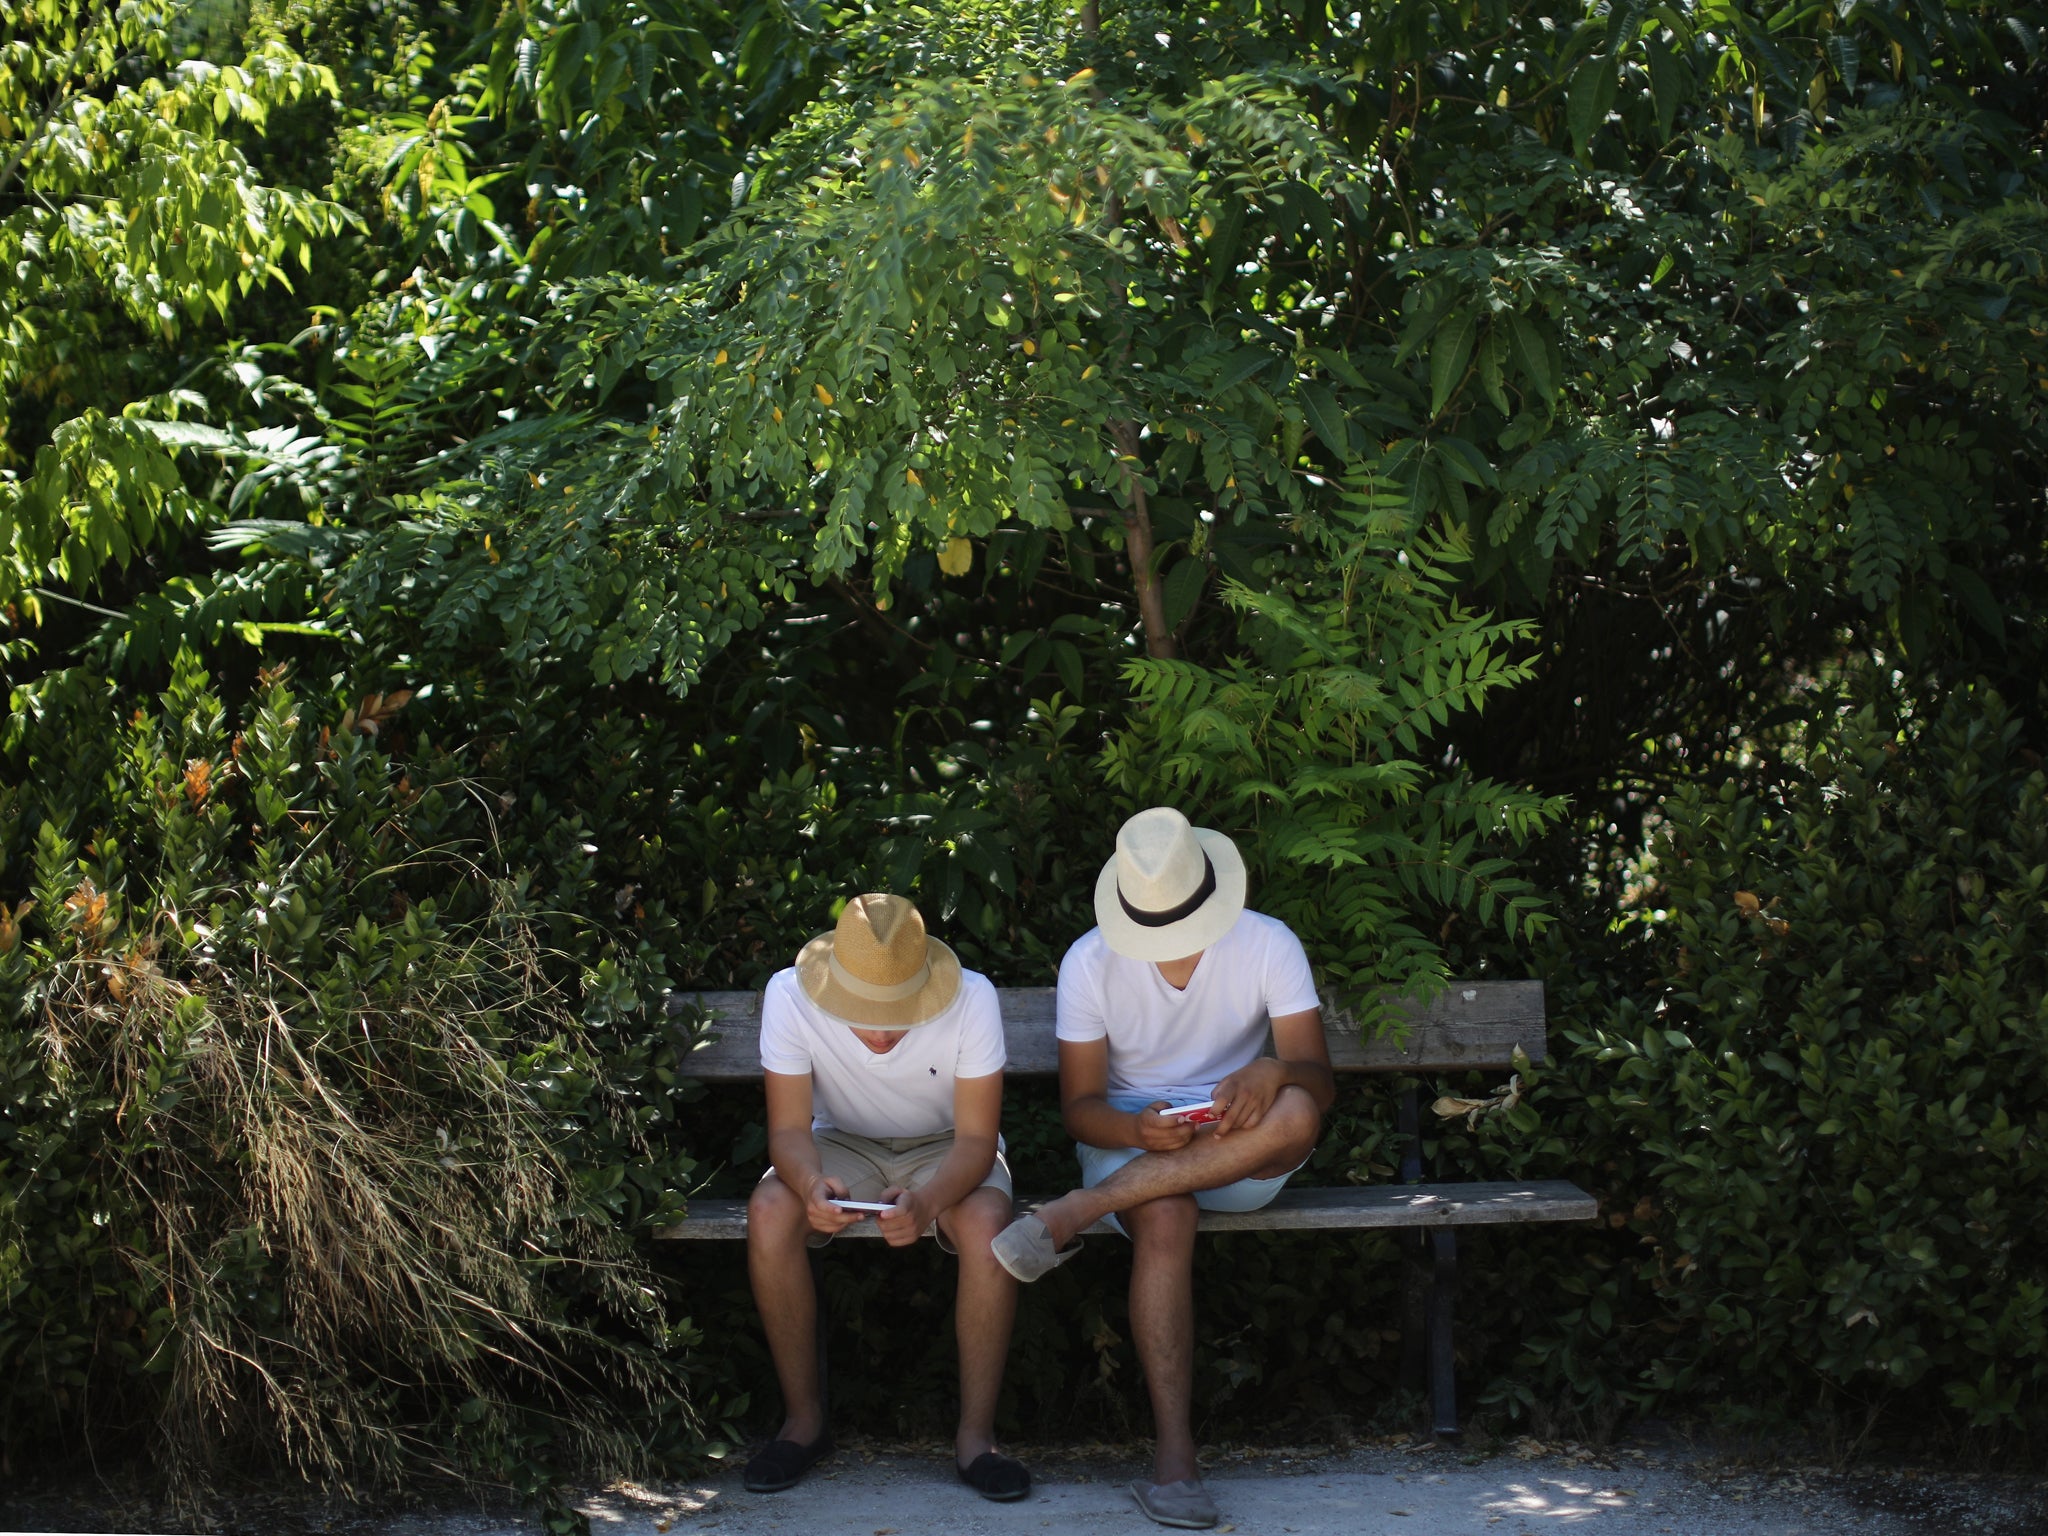 Two men look at their smart phones in the National Gardens on July 12, 2015 in Athens, Greece